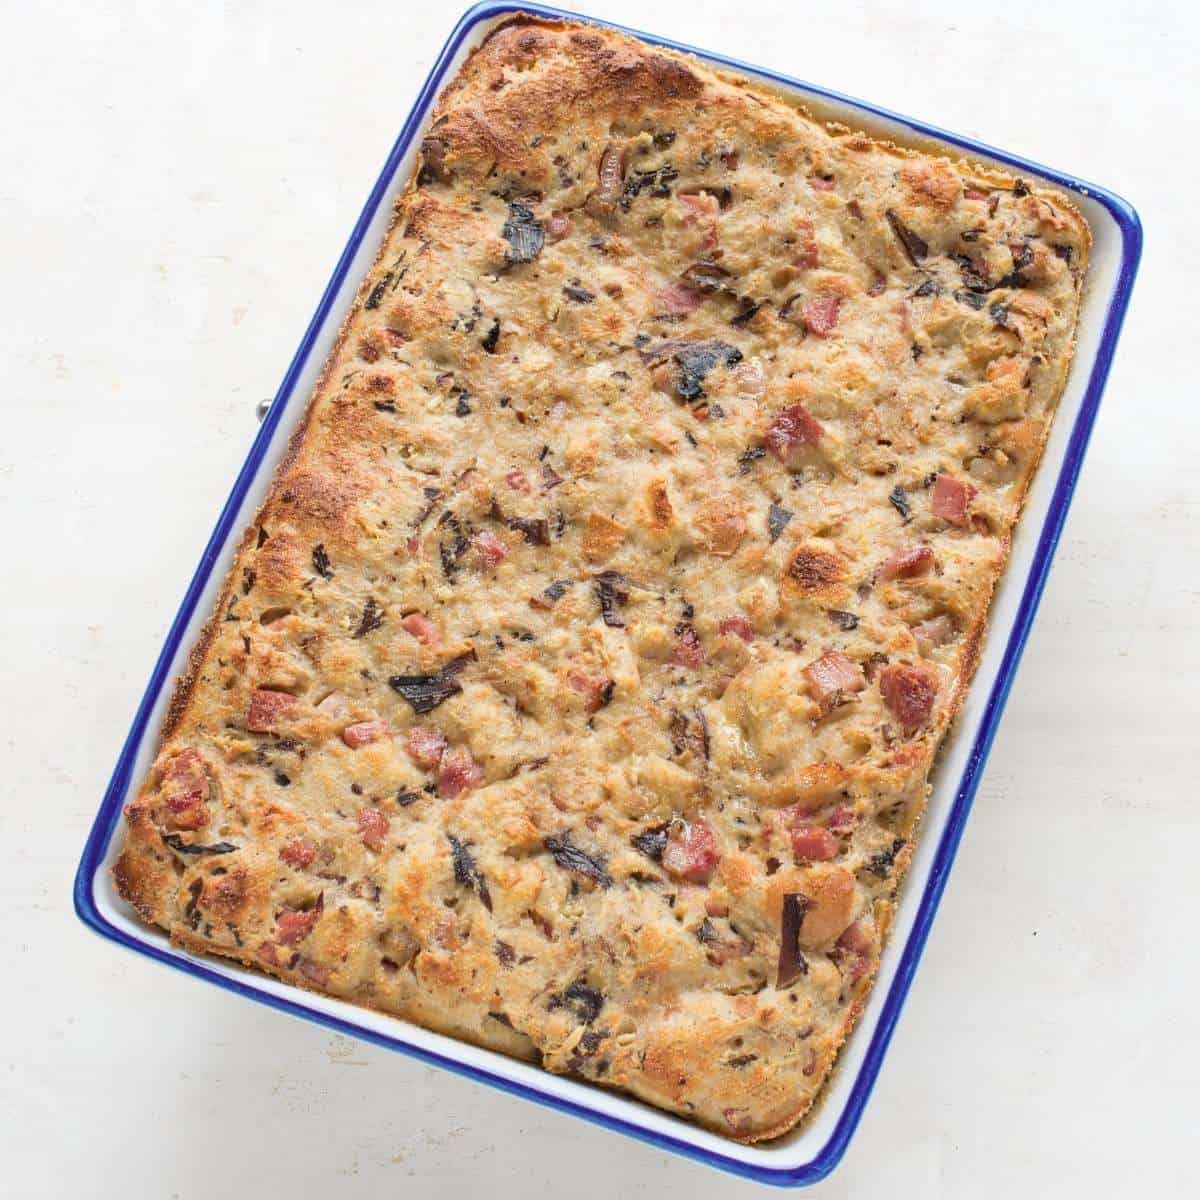 Mushroom bread pudding baked in a square rimmed dish.